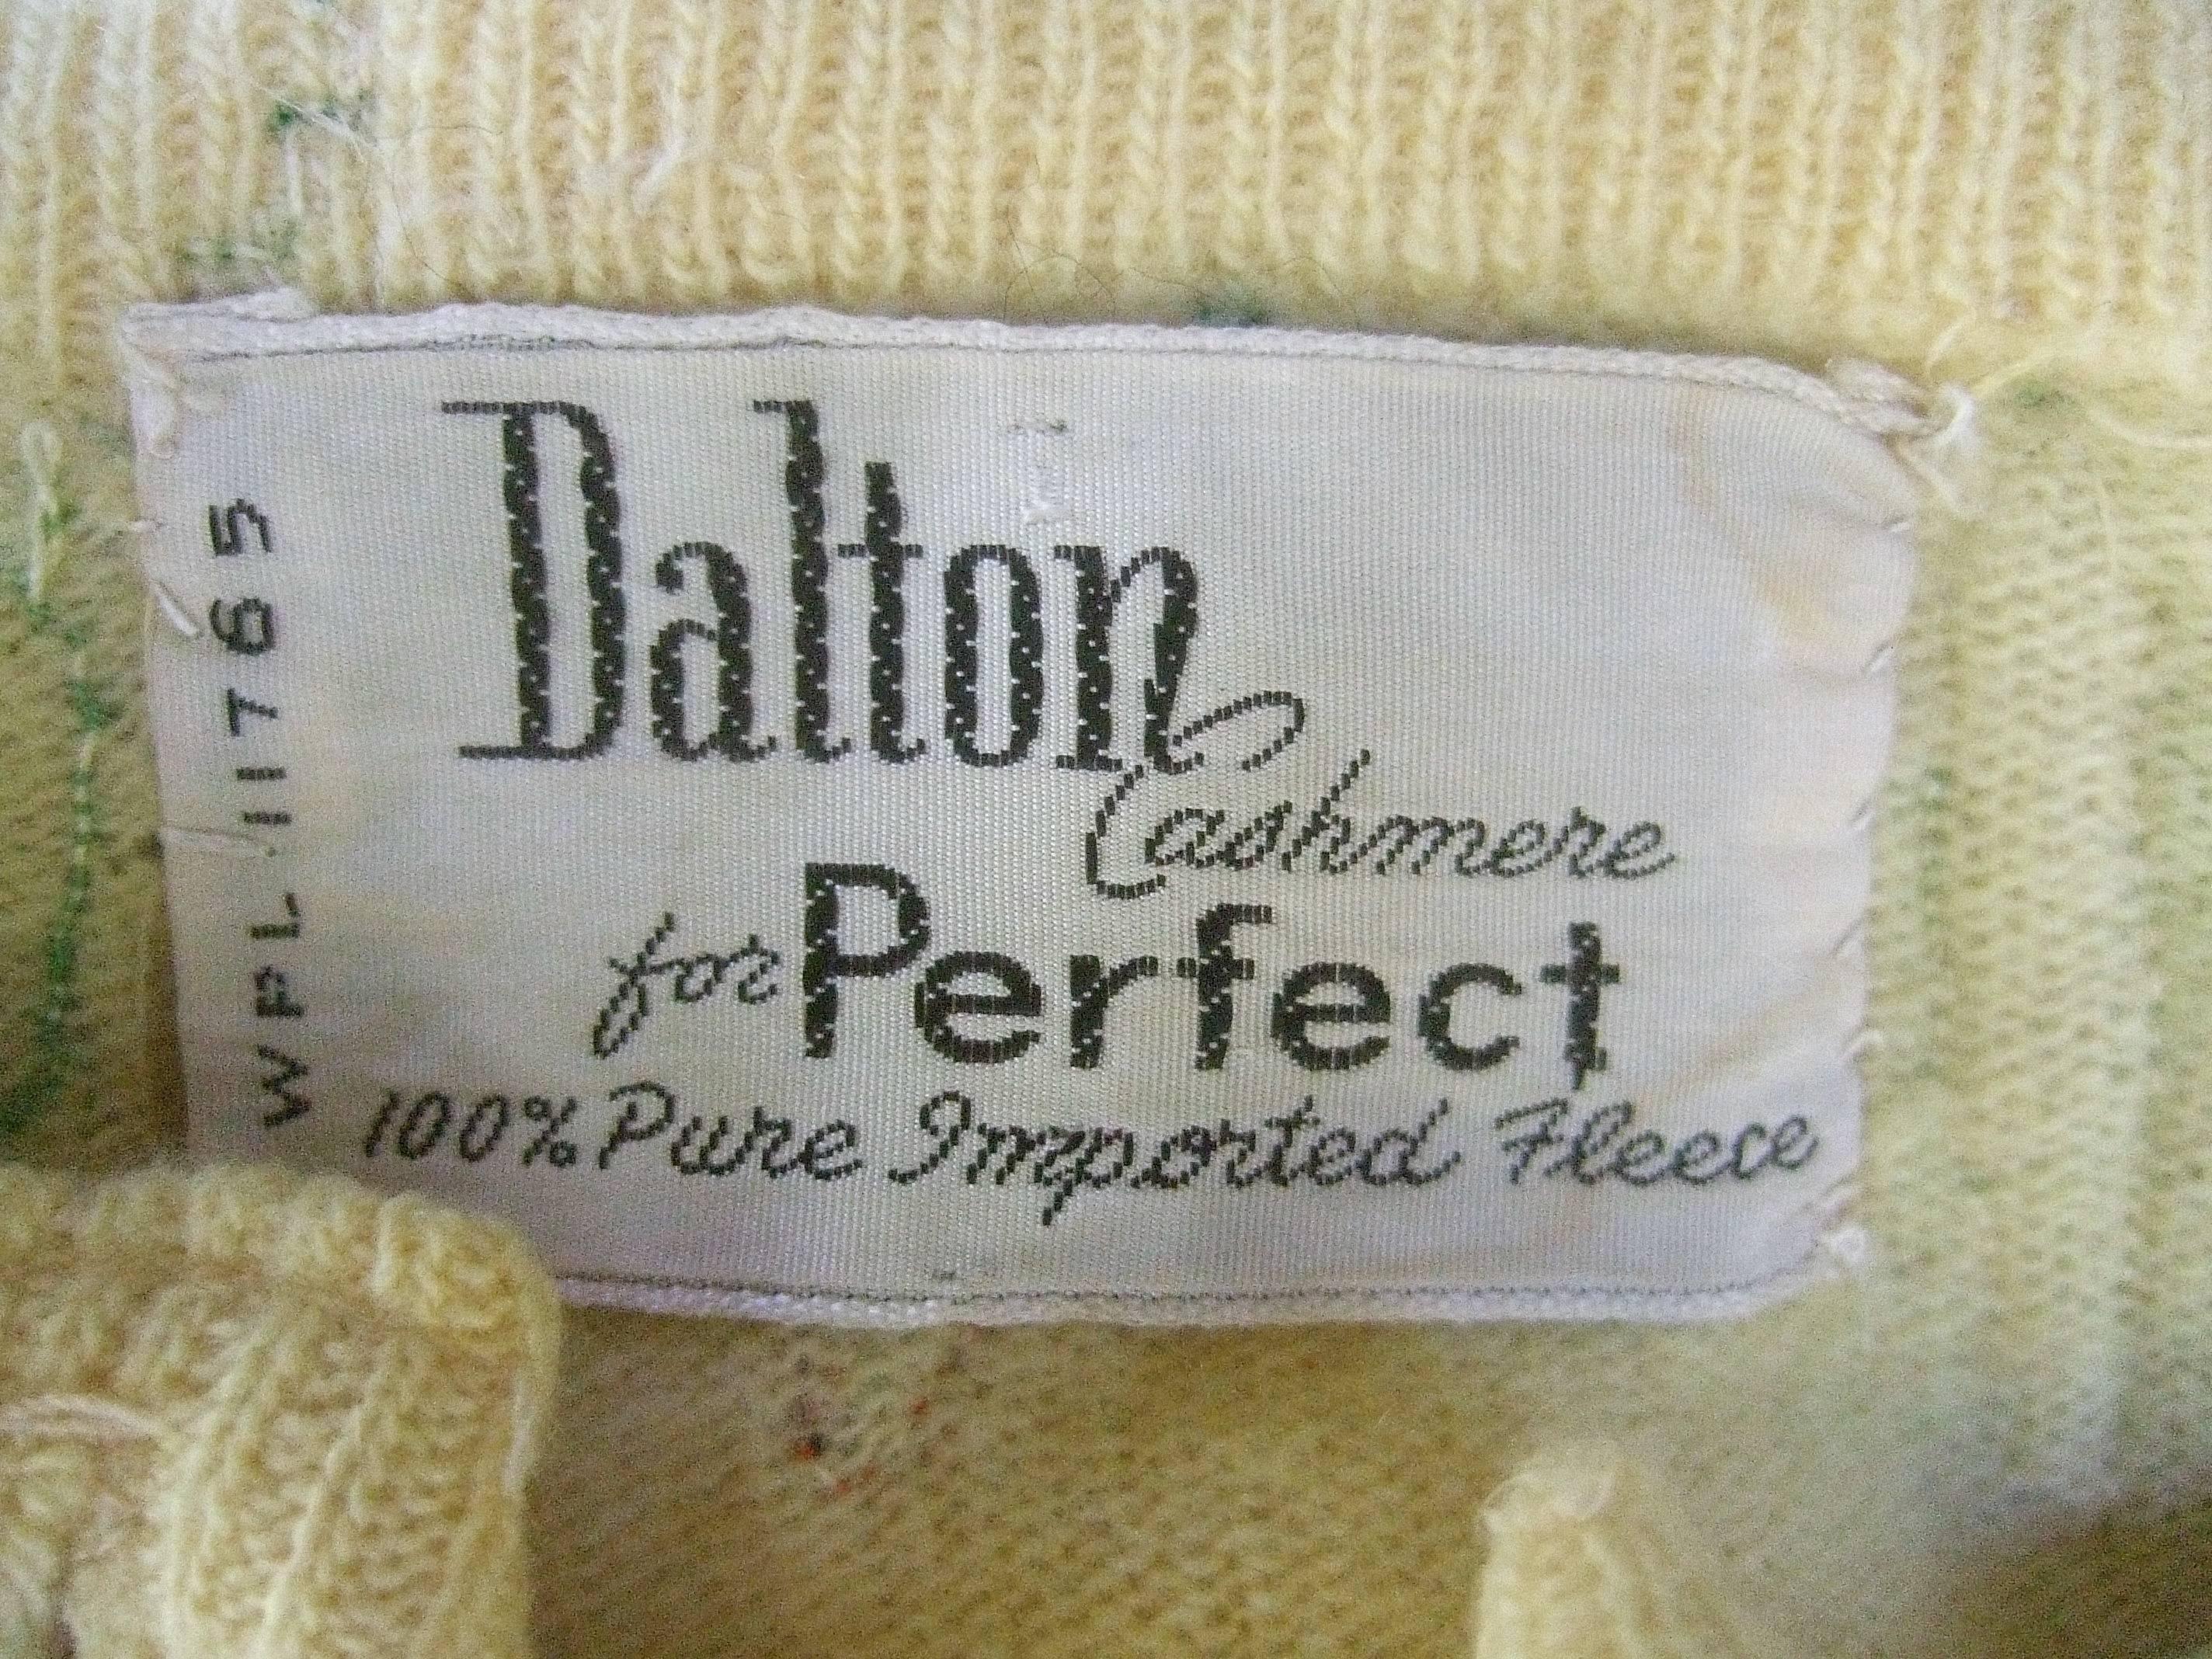 Whimsical Buttercup Yellow Cashmere Vegetable Theme Cardigan by Dalton c 1960  4